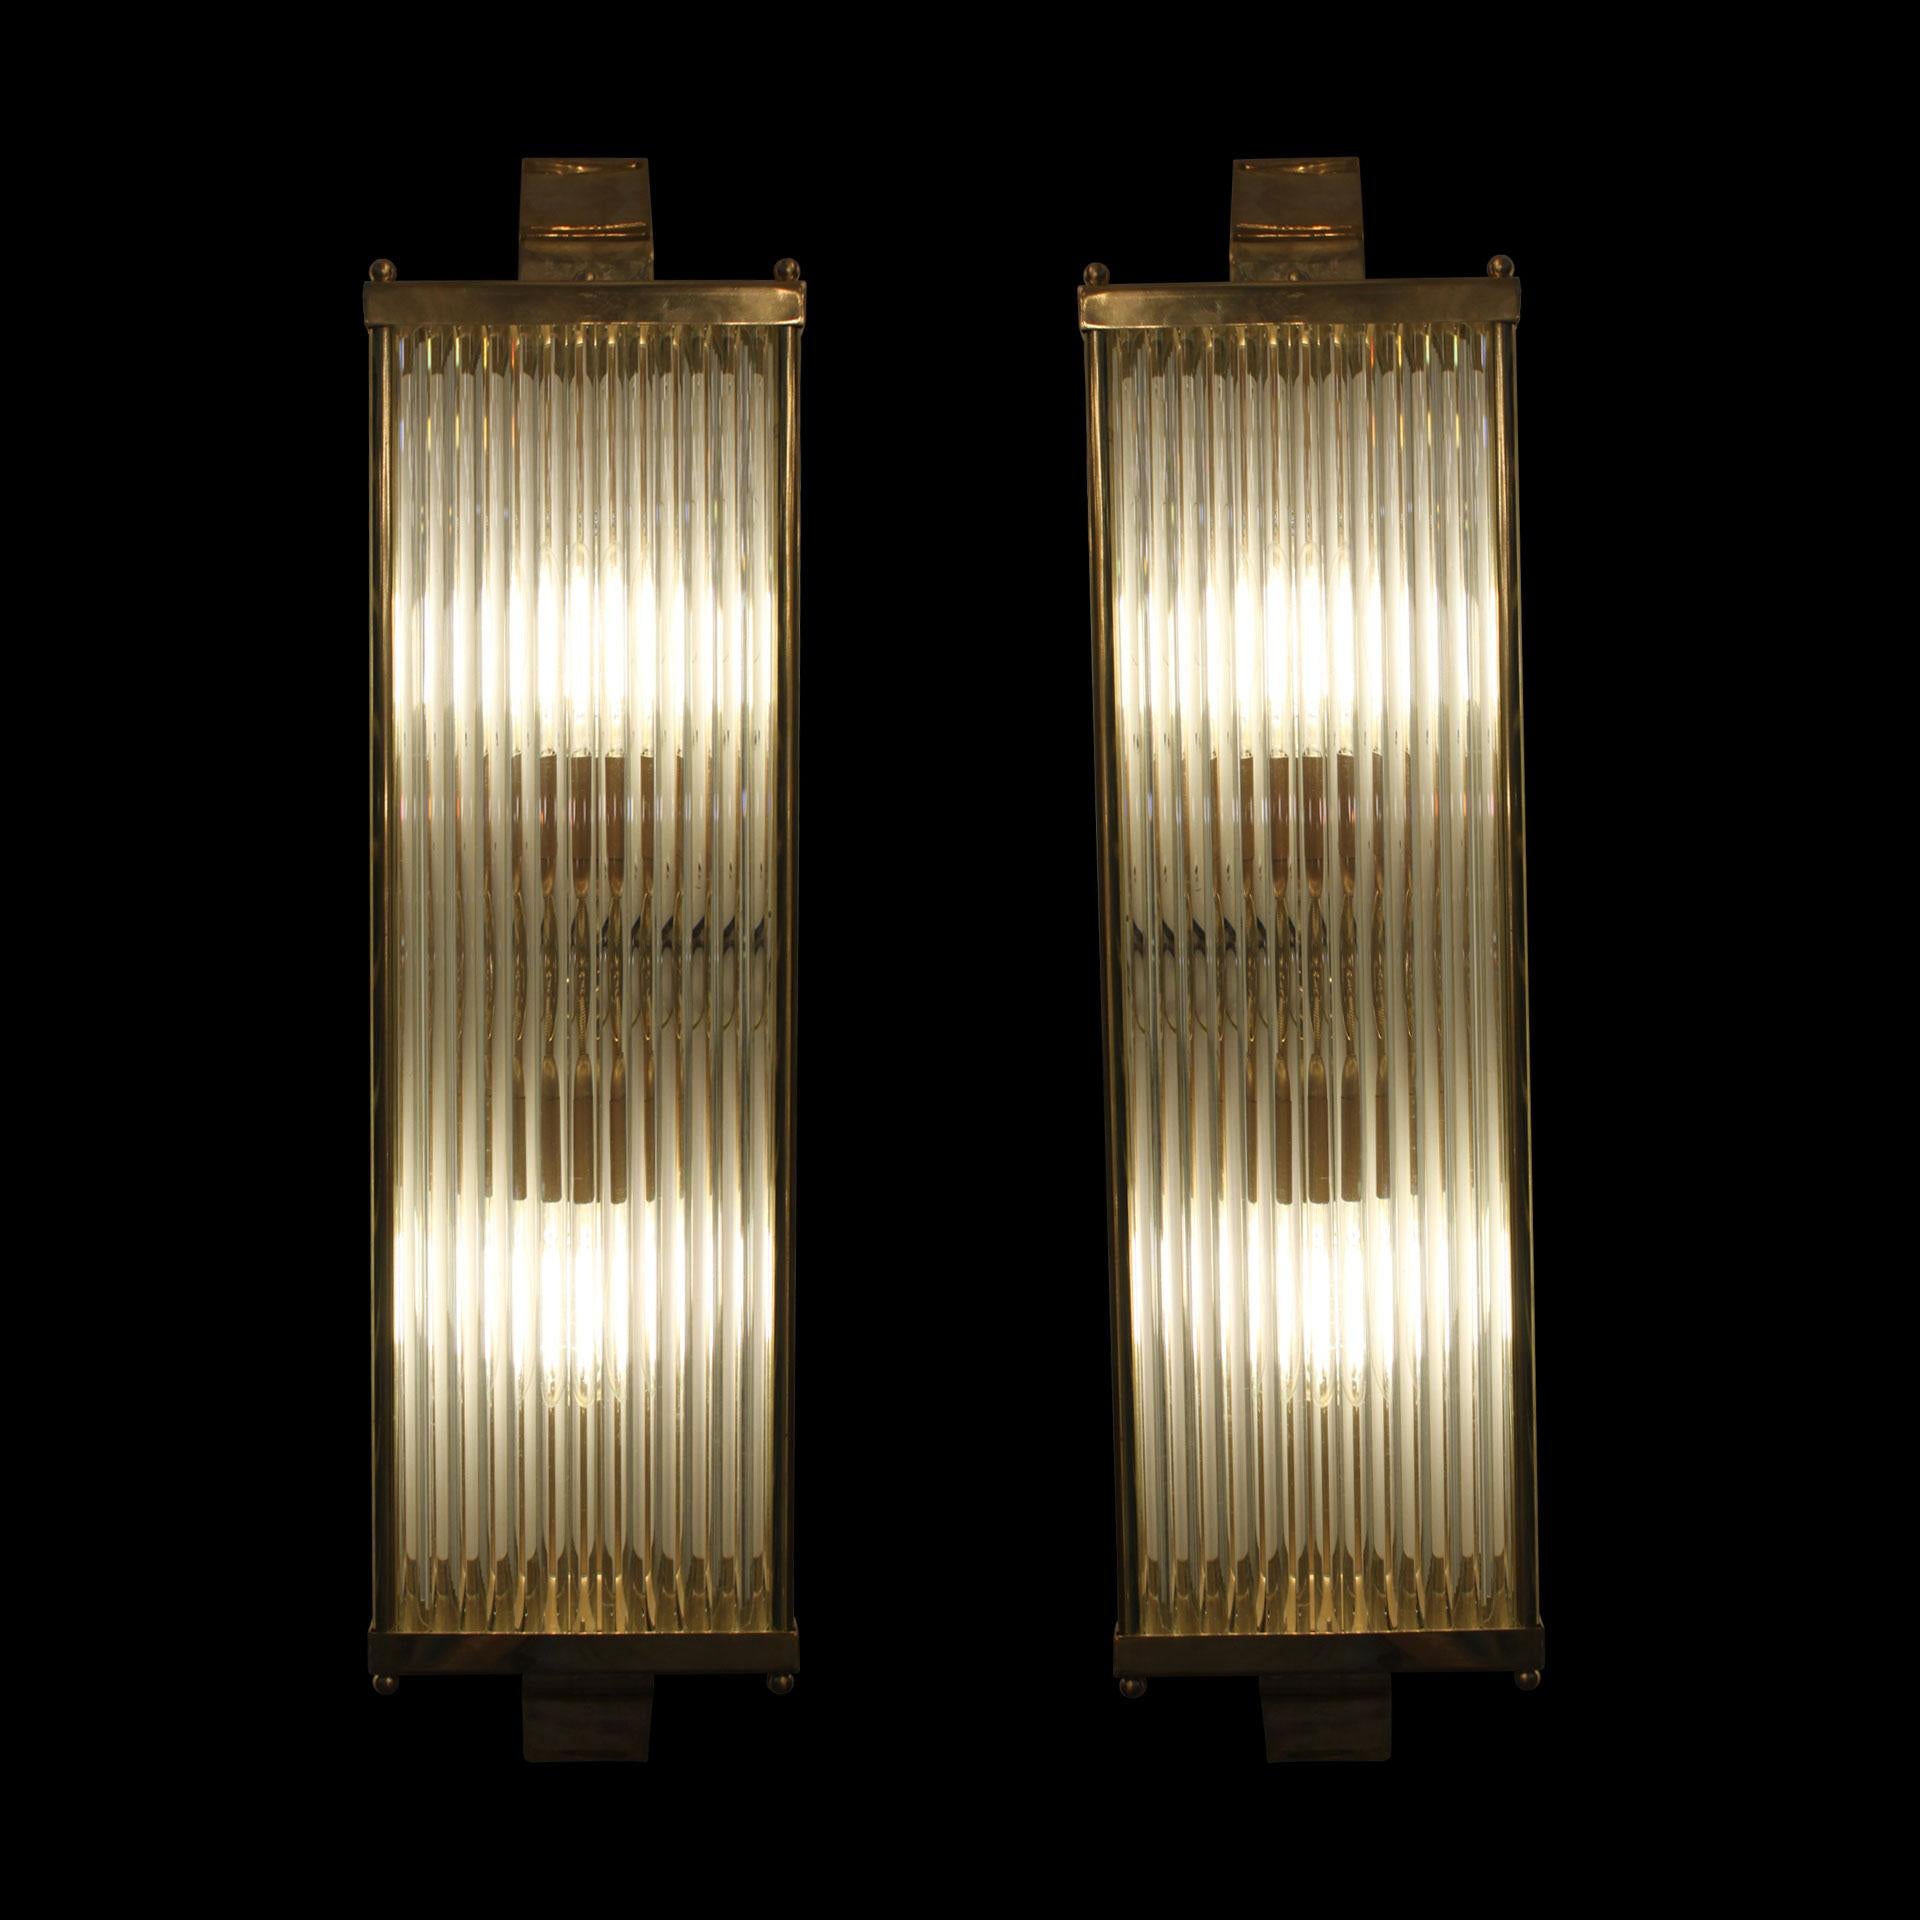 A beautiful pair of handmade Venetian Art Deco style wall lights in polished brass and tubular glass rods on 3 faces with a polished brass rectangular top and base. Featuring 2 bulbs in each lights. A beautiful addition to any entrance hall, room or